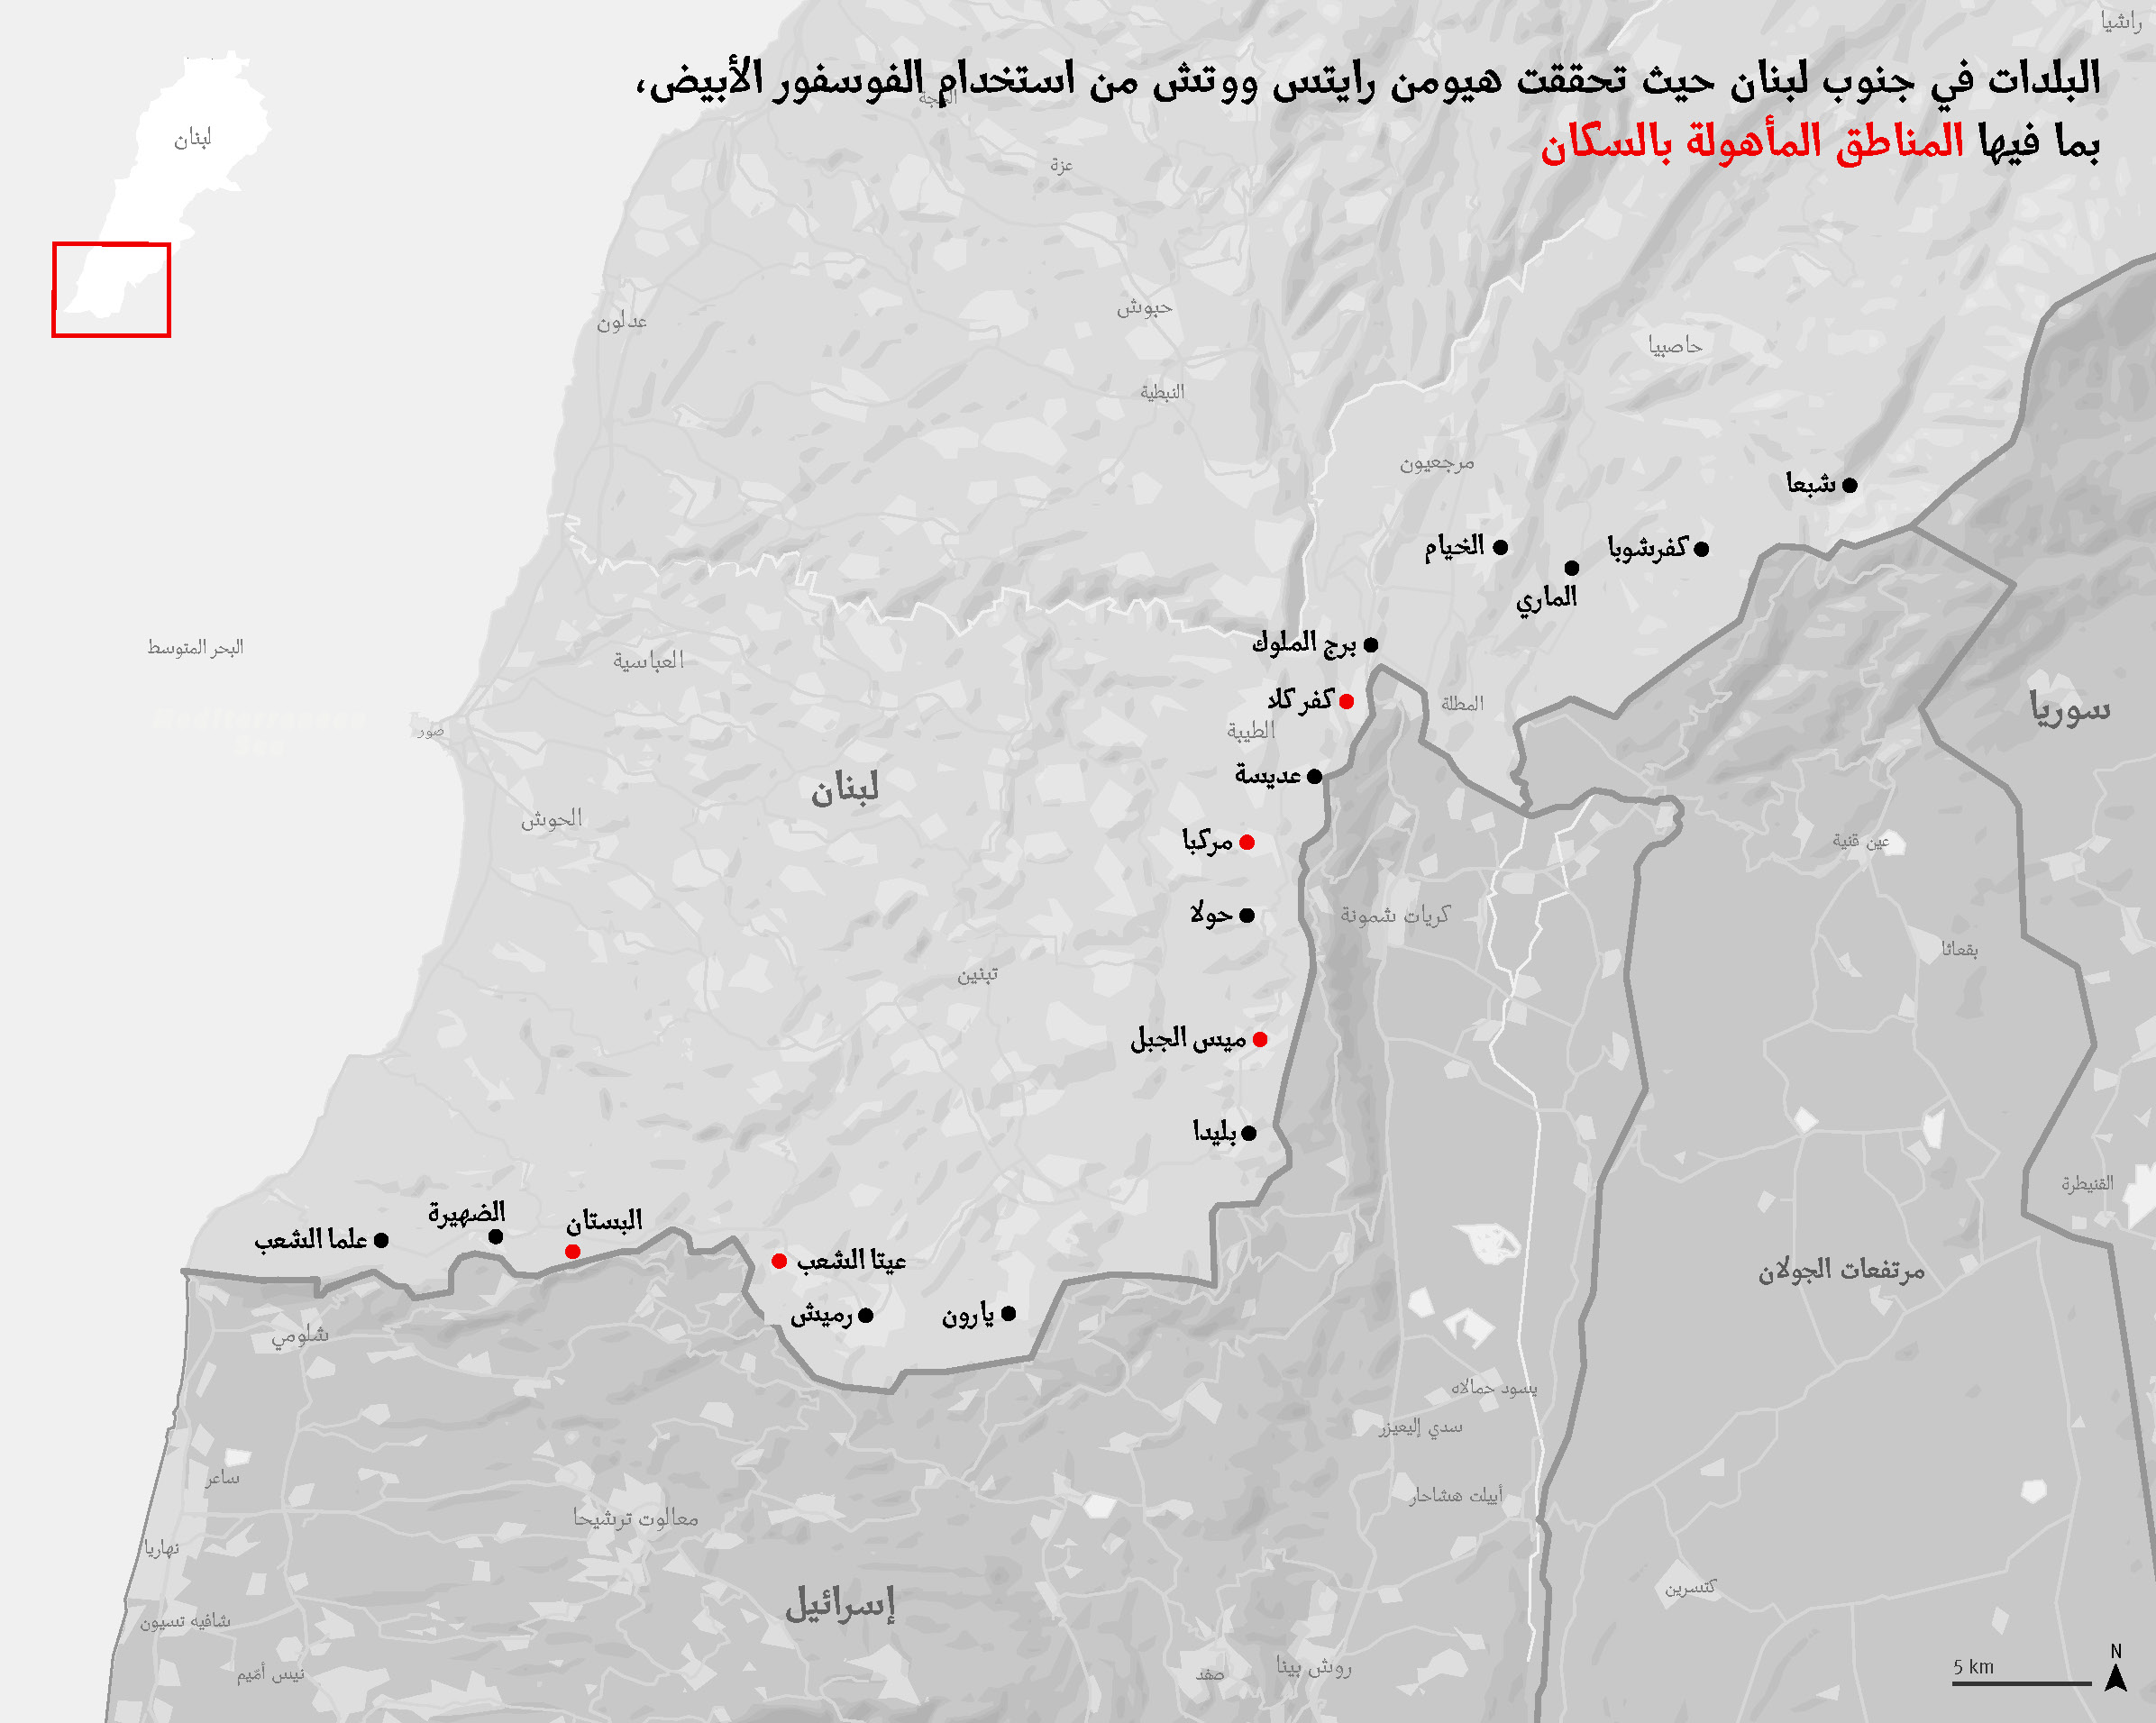 Map of municipalities in southern Lebanon where Human Rights Watch verified the use of white phosphorous